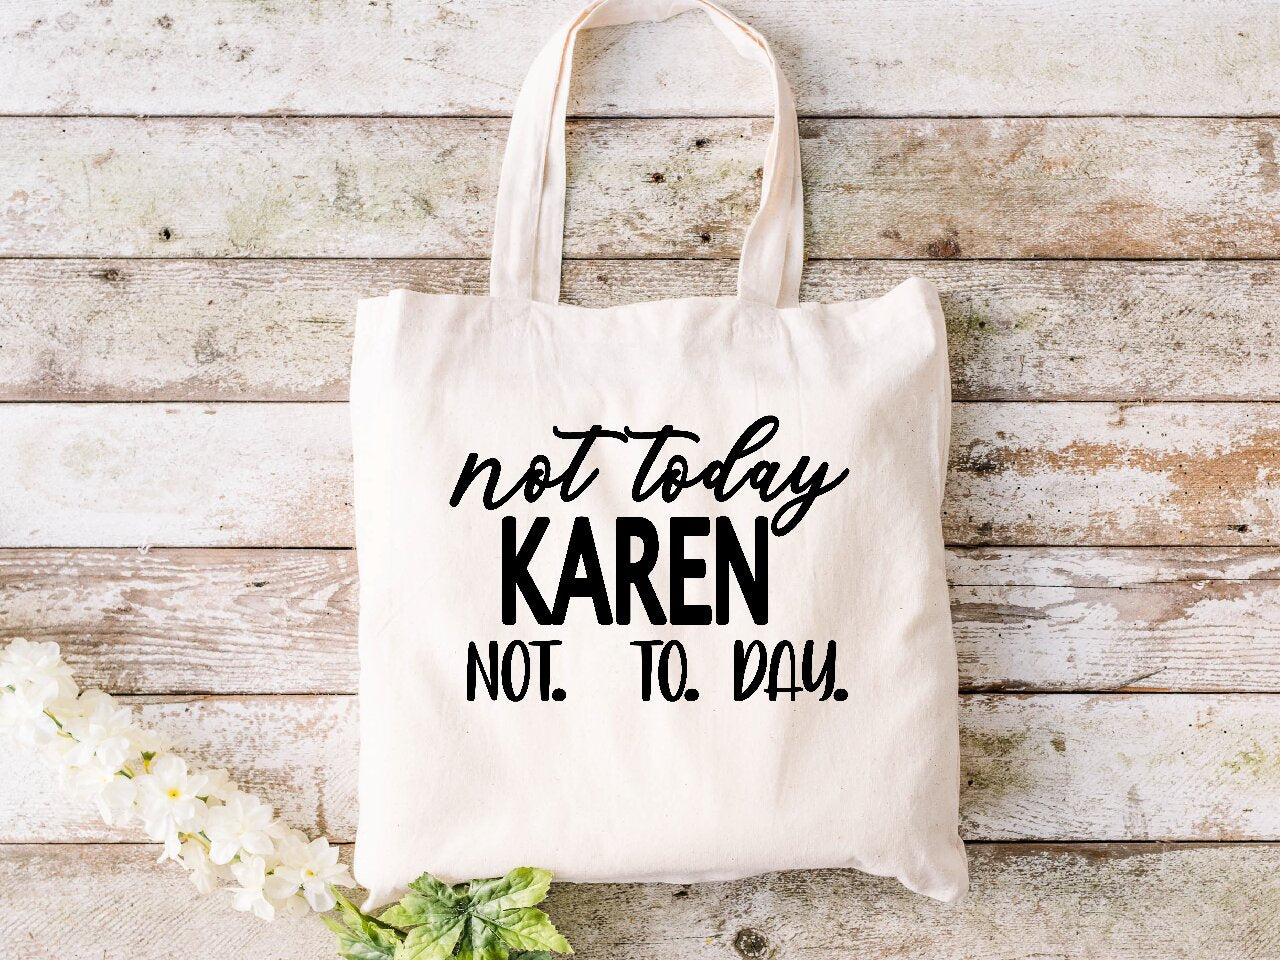 Not Today Karen Not.   To.    Day.  - Tote Bag